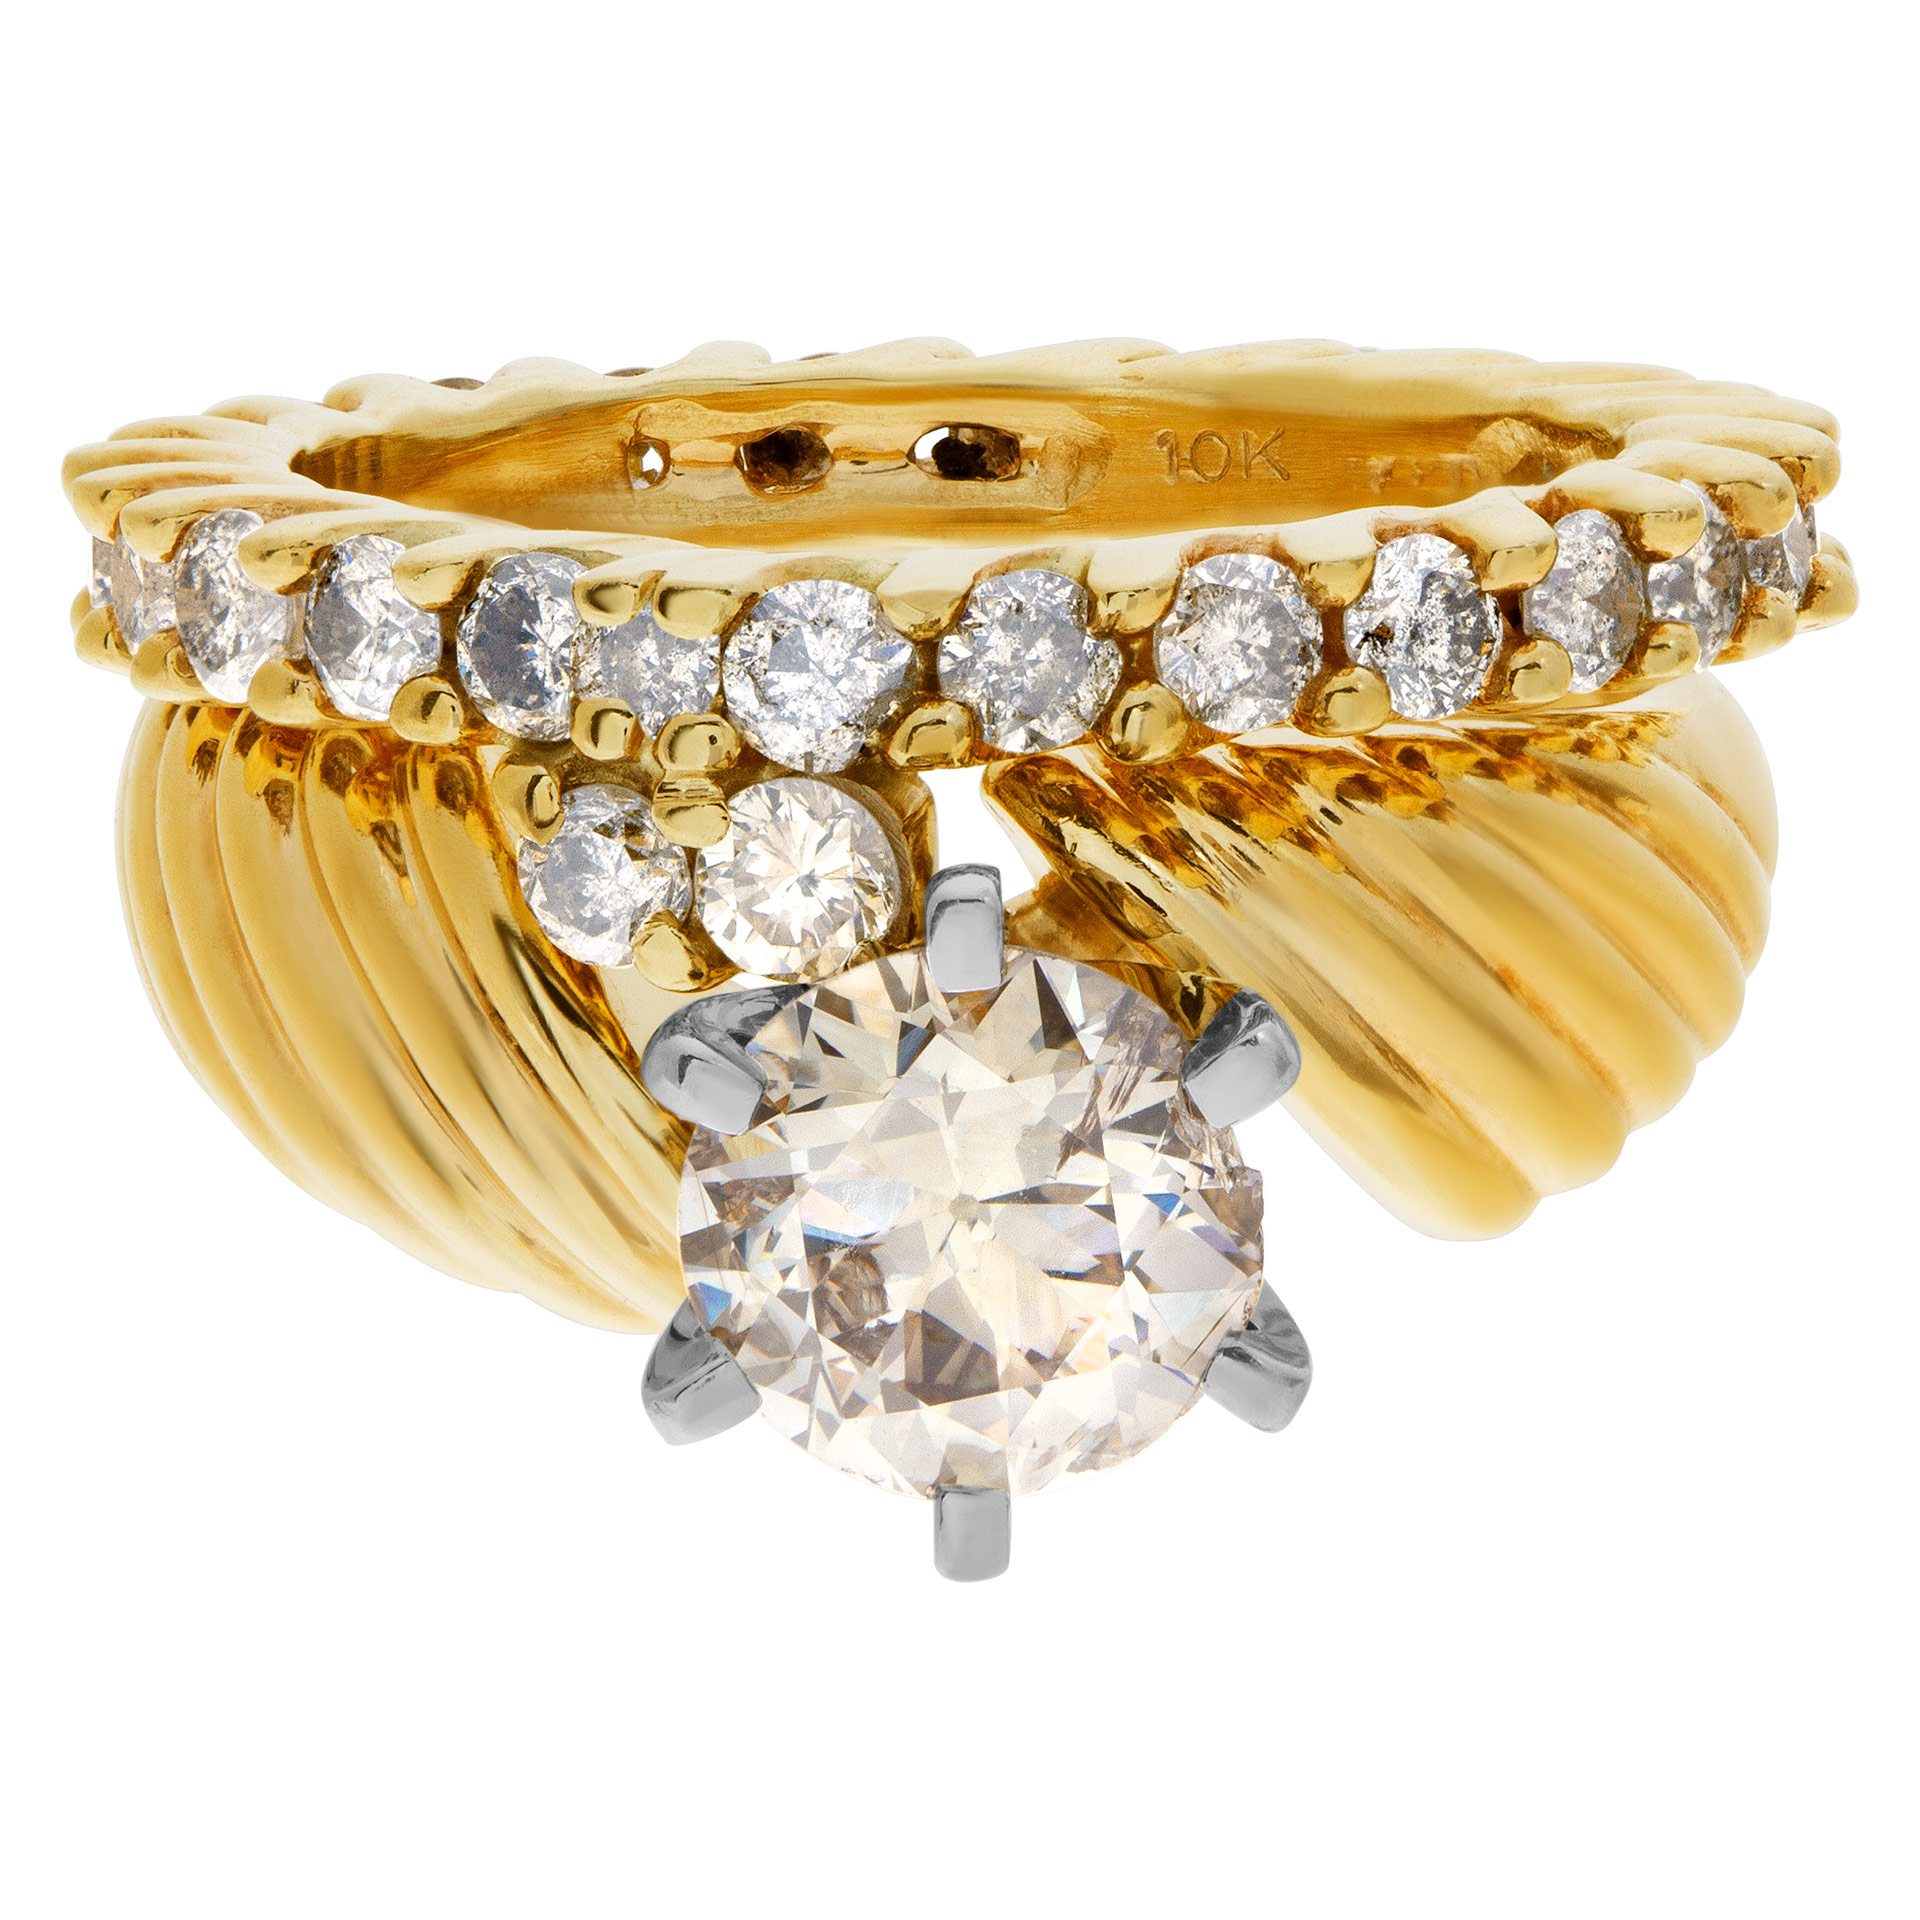 Beautiful Diamond Eternity Band and Ring engagement ring set in 14k and 10k yellow gold. 1.75 carats